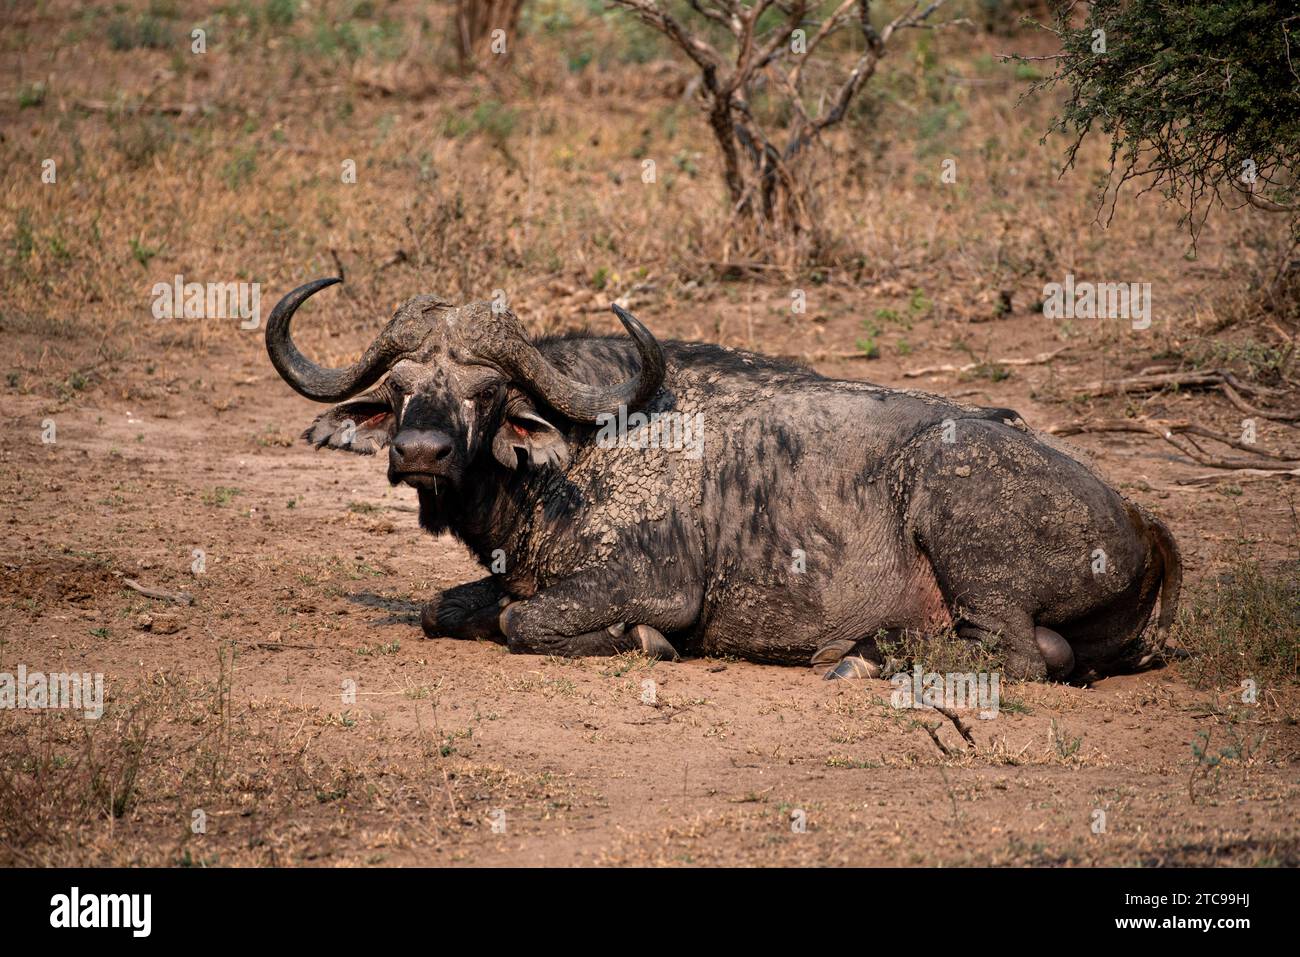 An old buffalo bull caked with dried mud watching the photographer suspiciously Stock Photo